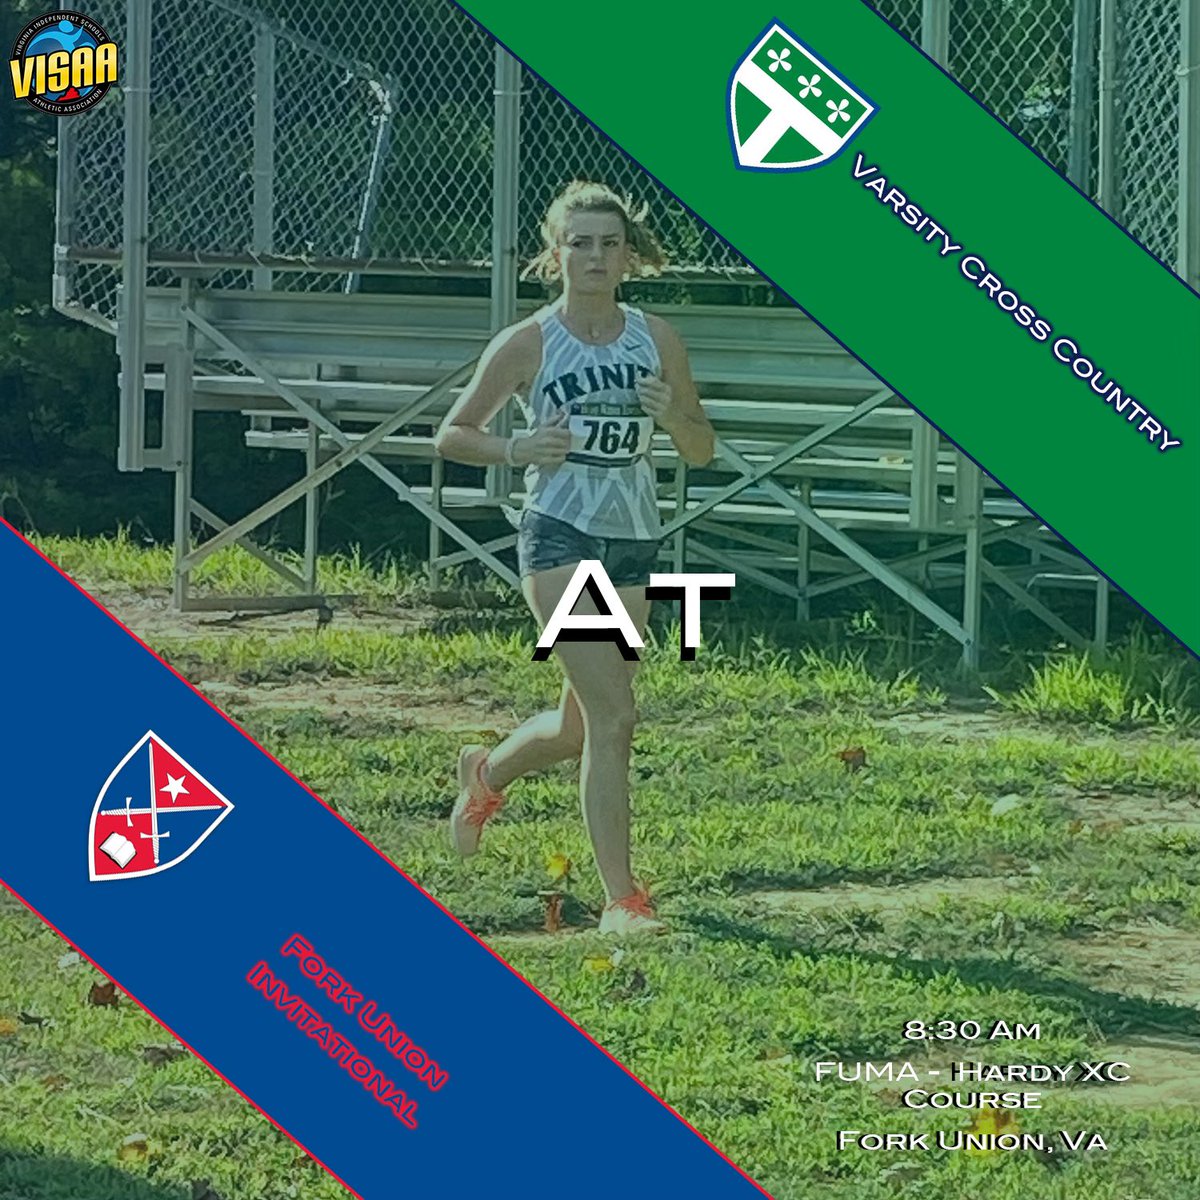 Titans hit the course this fall morning and look to take over at the FUMA invite! Wish them luck on the road Let’s Go Titans!